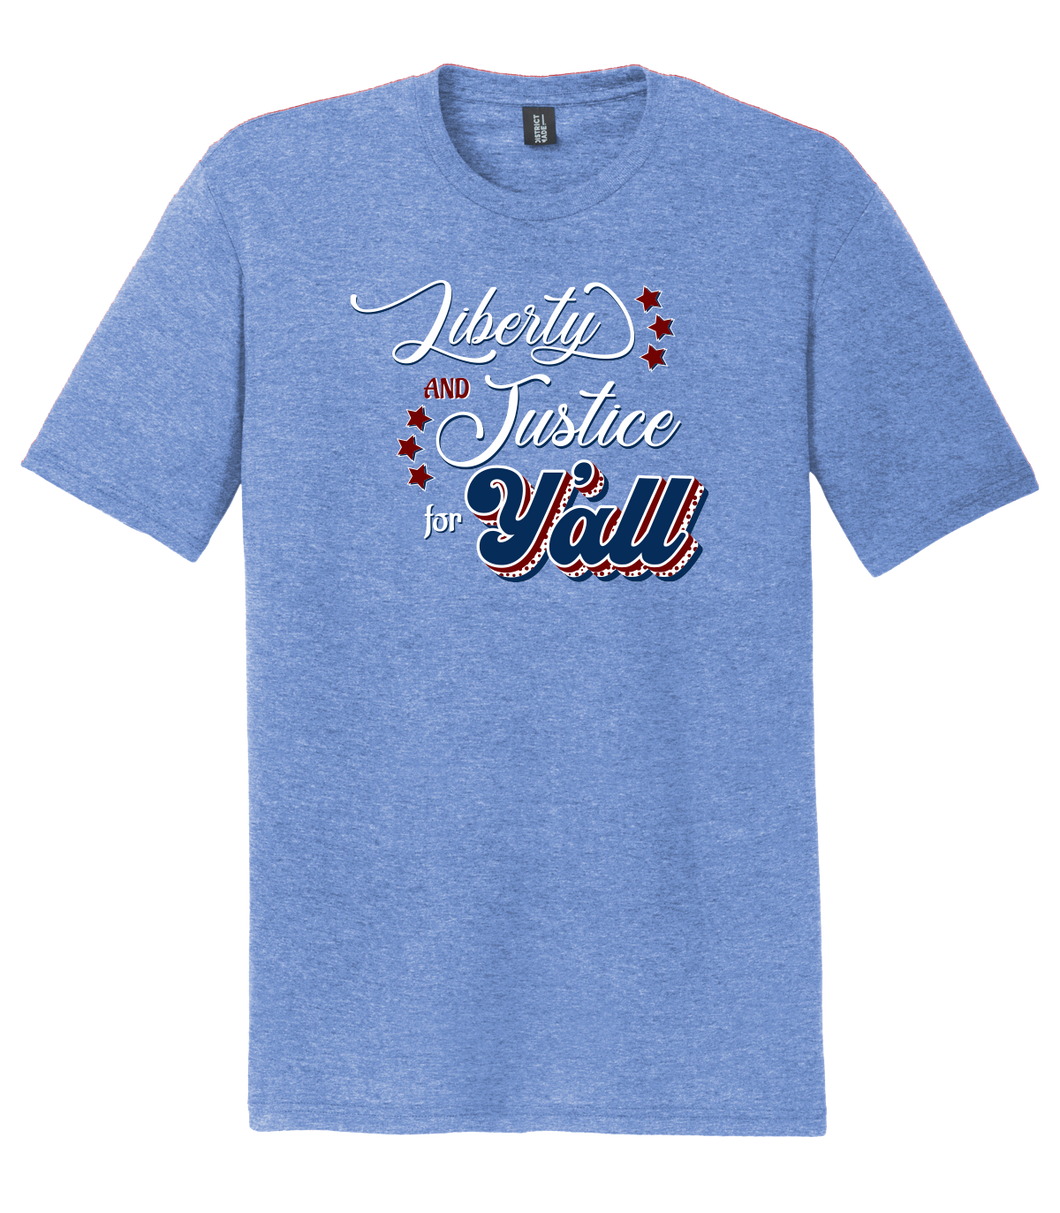 Liberty and Justice for Y'all Blue Heather Tee